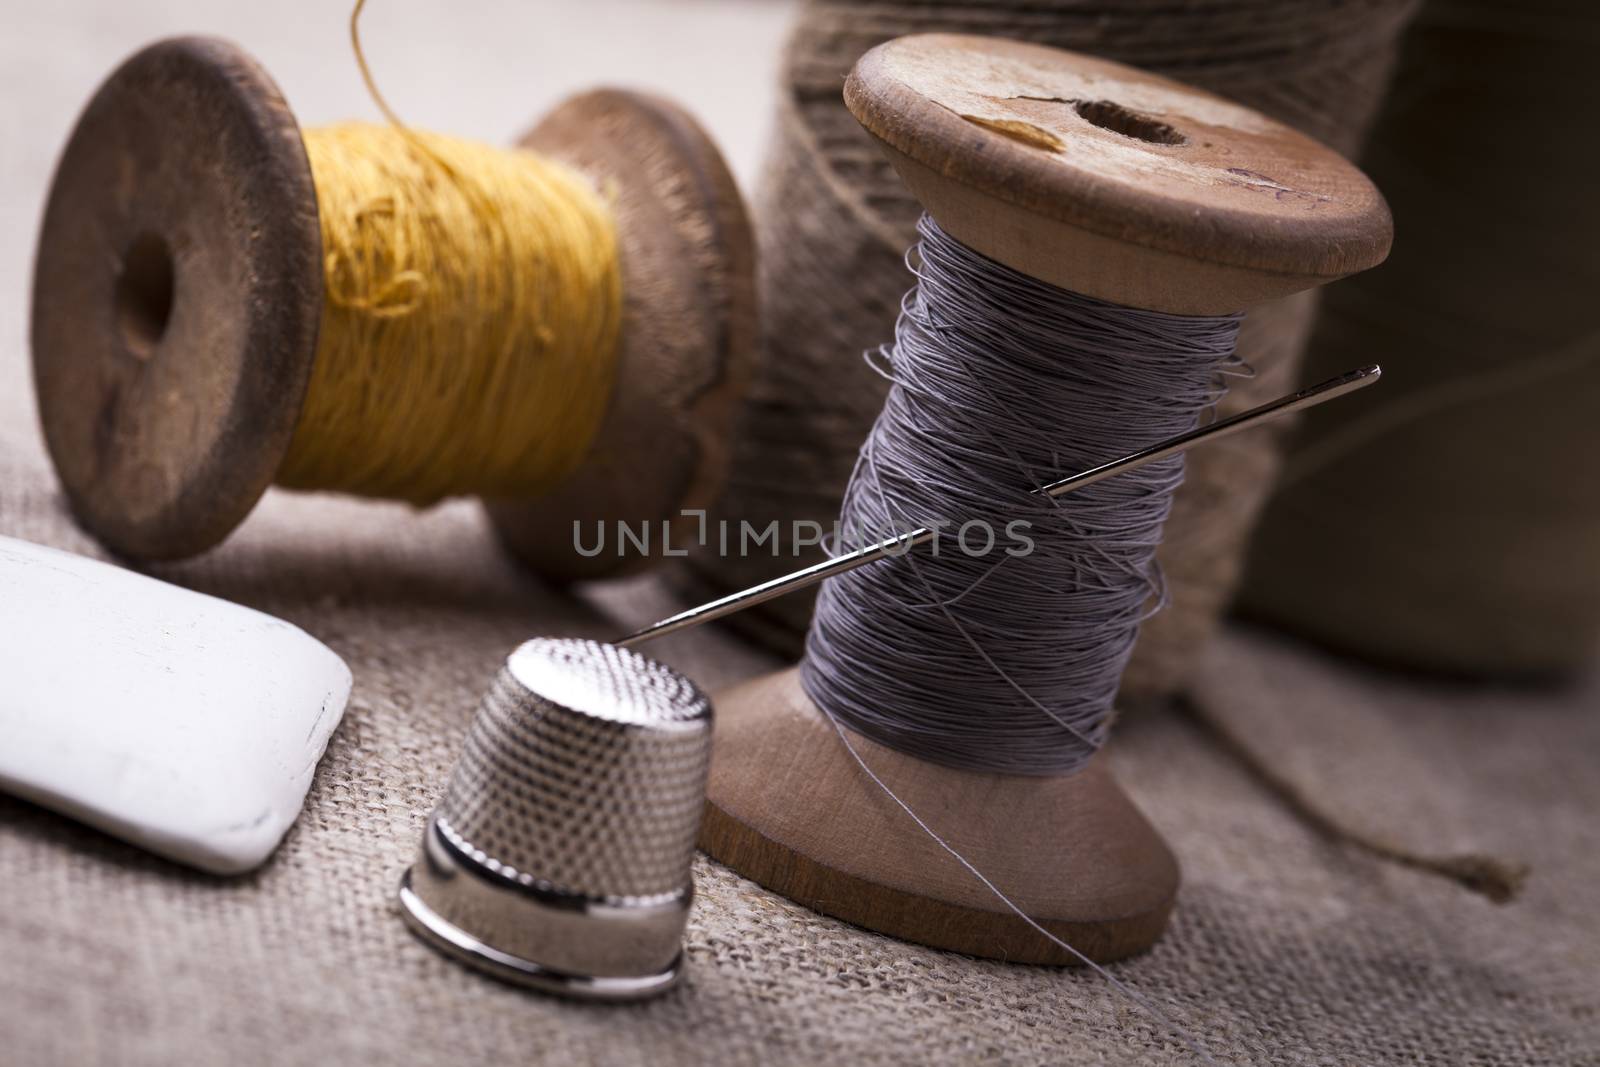 Sewing instruments, threads, needles, bobbins and materials. by fikmik